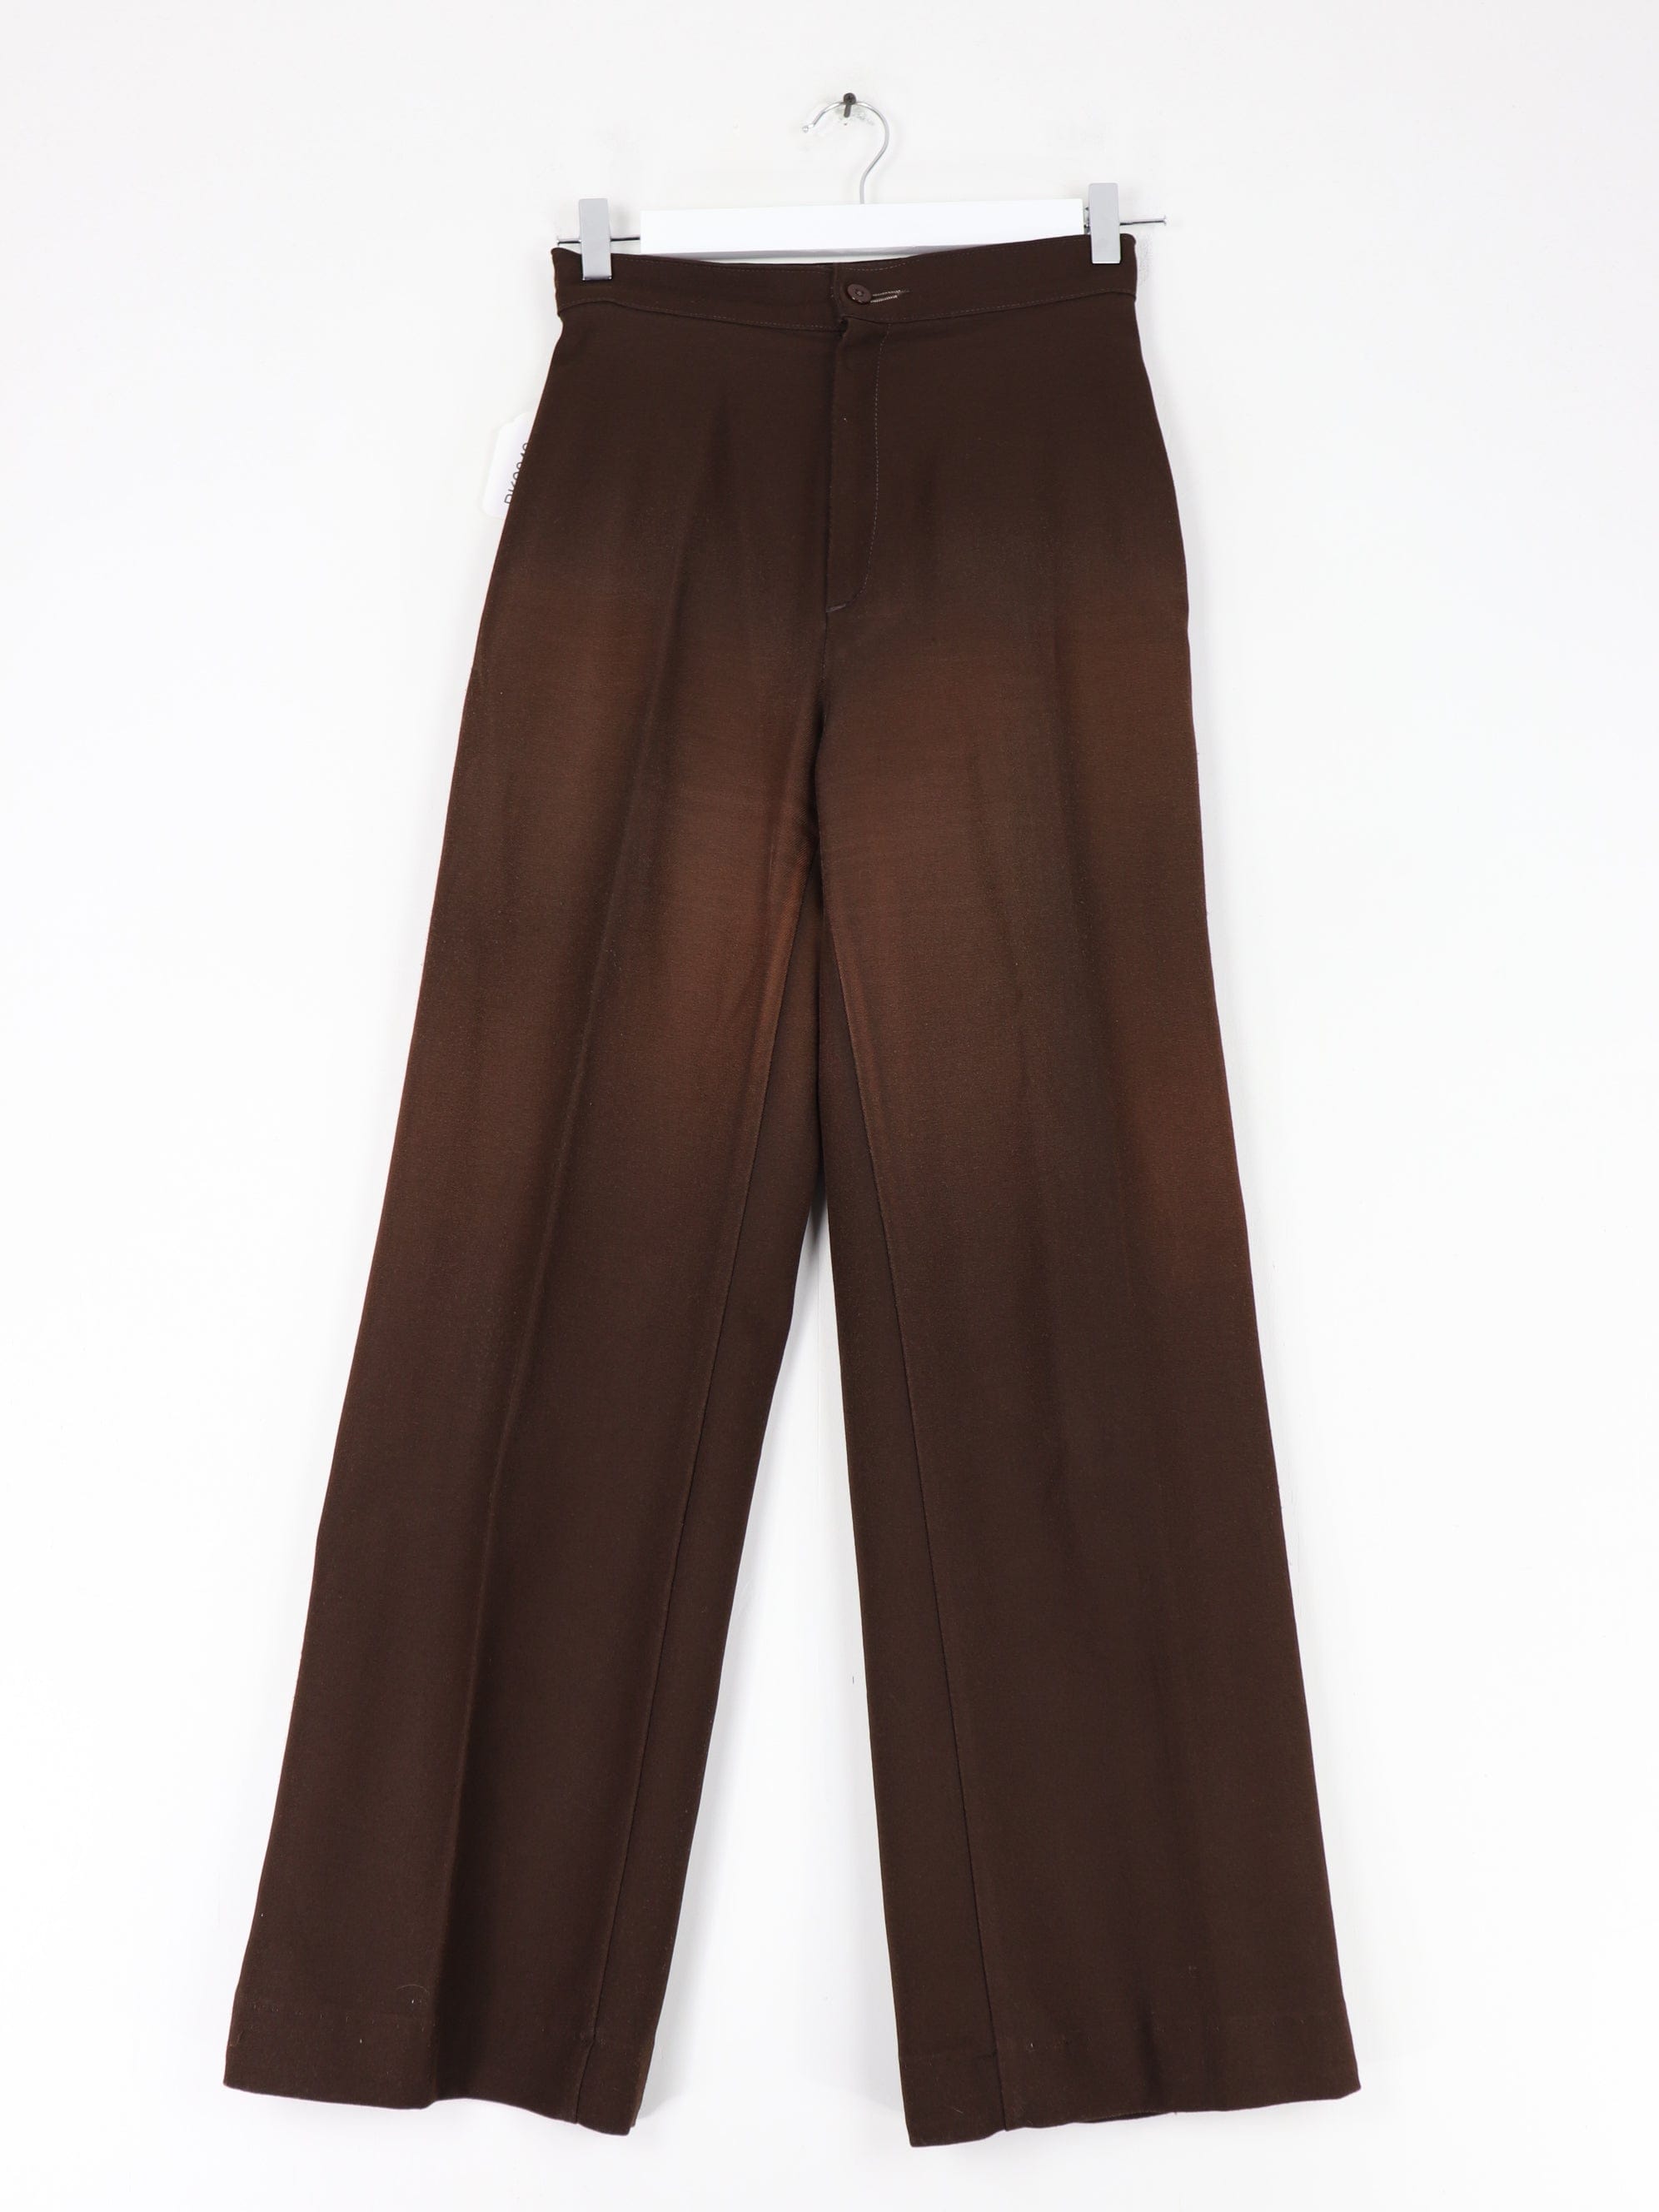 Vintage JC Penney Pants Womens 10 Brown Pleated Flare Trousers – Proper  Vintage